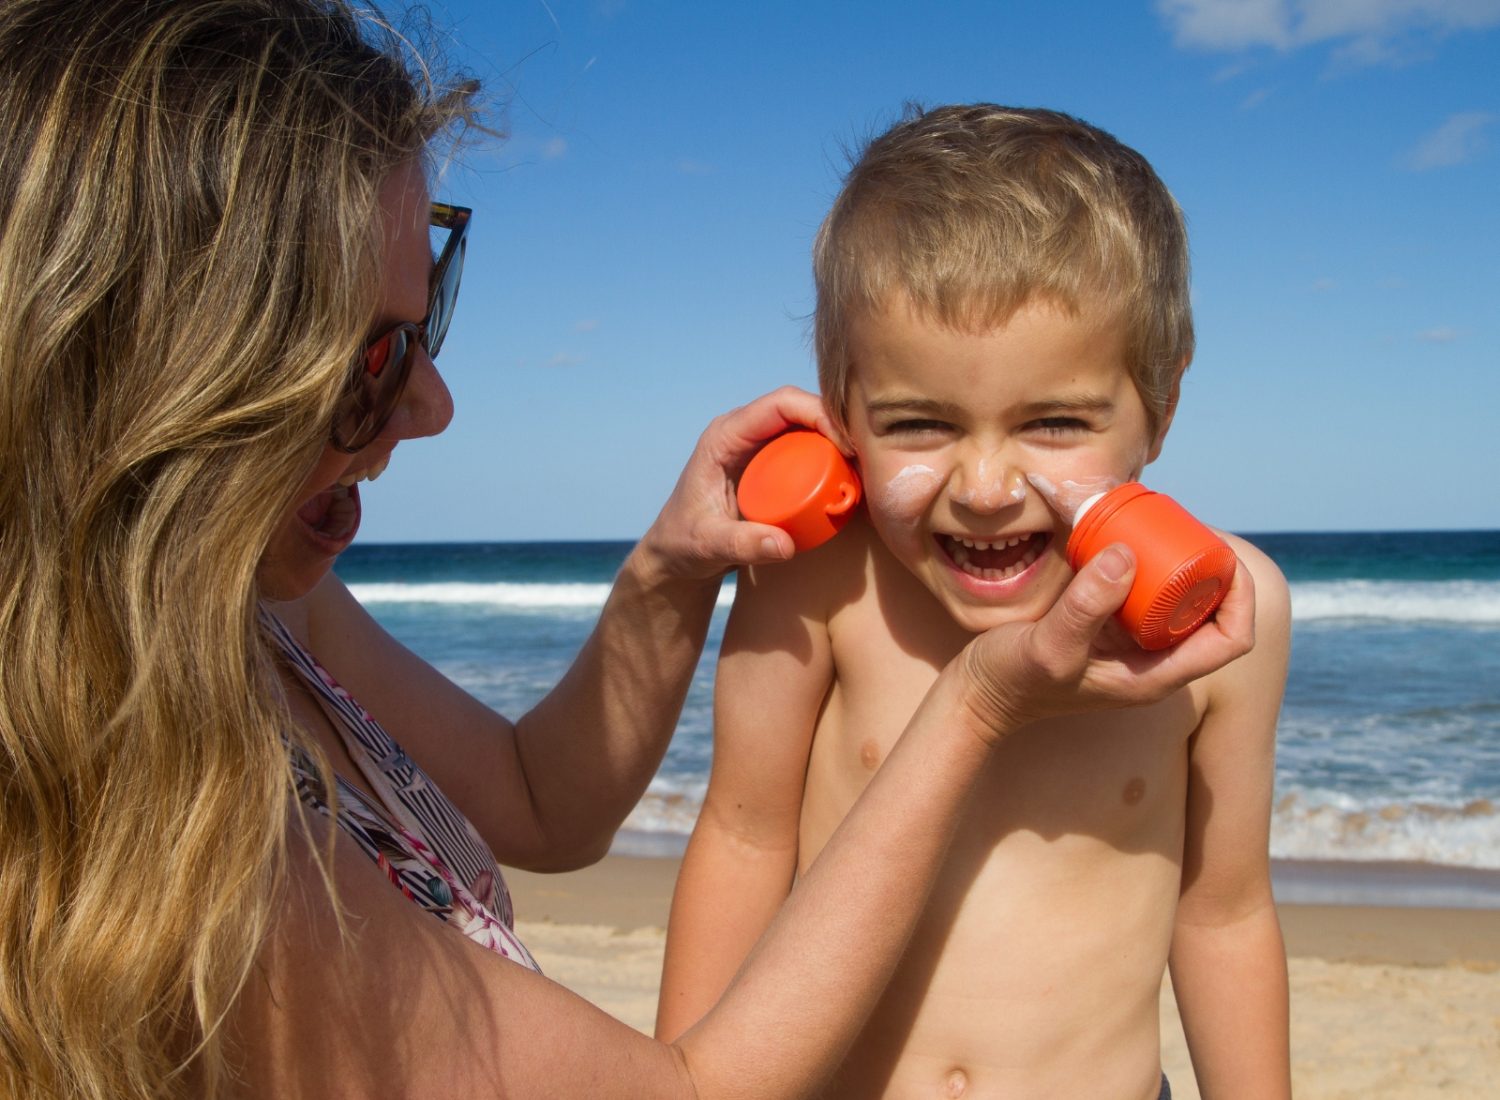 A woman, possibly brainstorming business ideas for women, playfully applies sunscreen to a smiling young boy's face at the beach using bright orange sunscreen applicators. The ocean and sky with a few clouds are visible in the background. The child is shirtless, and both are enjoying a sunny day.